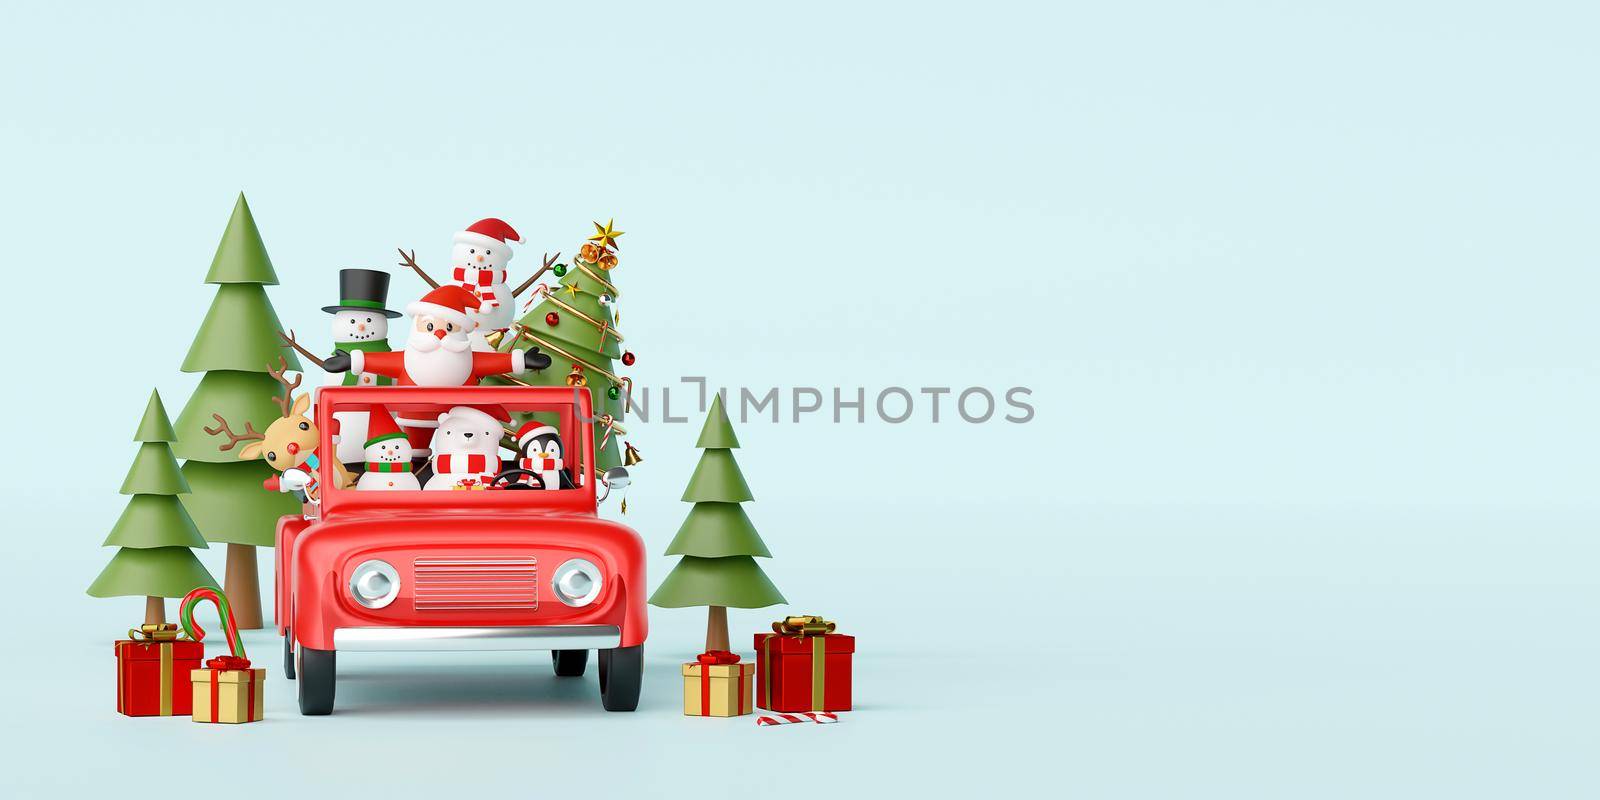 Merry Christmas and Happy New Year, Santa Claus and friend in a red car with Christmas decoration, 3d rendering by nutzchotwarut